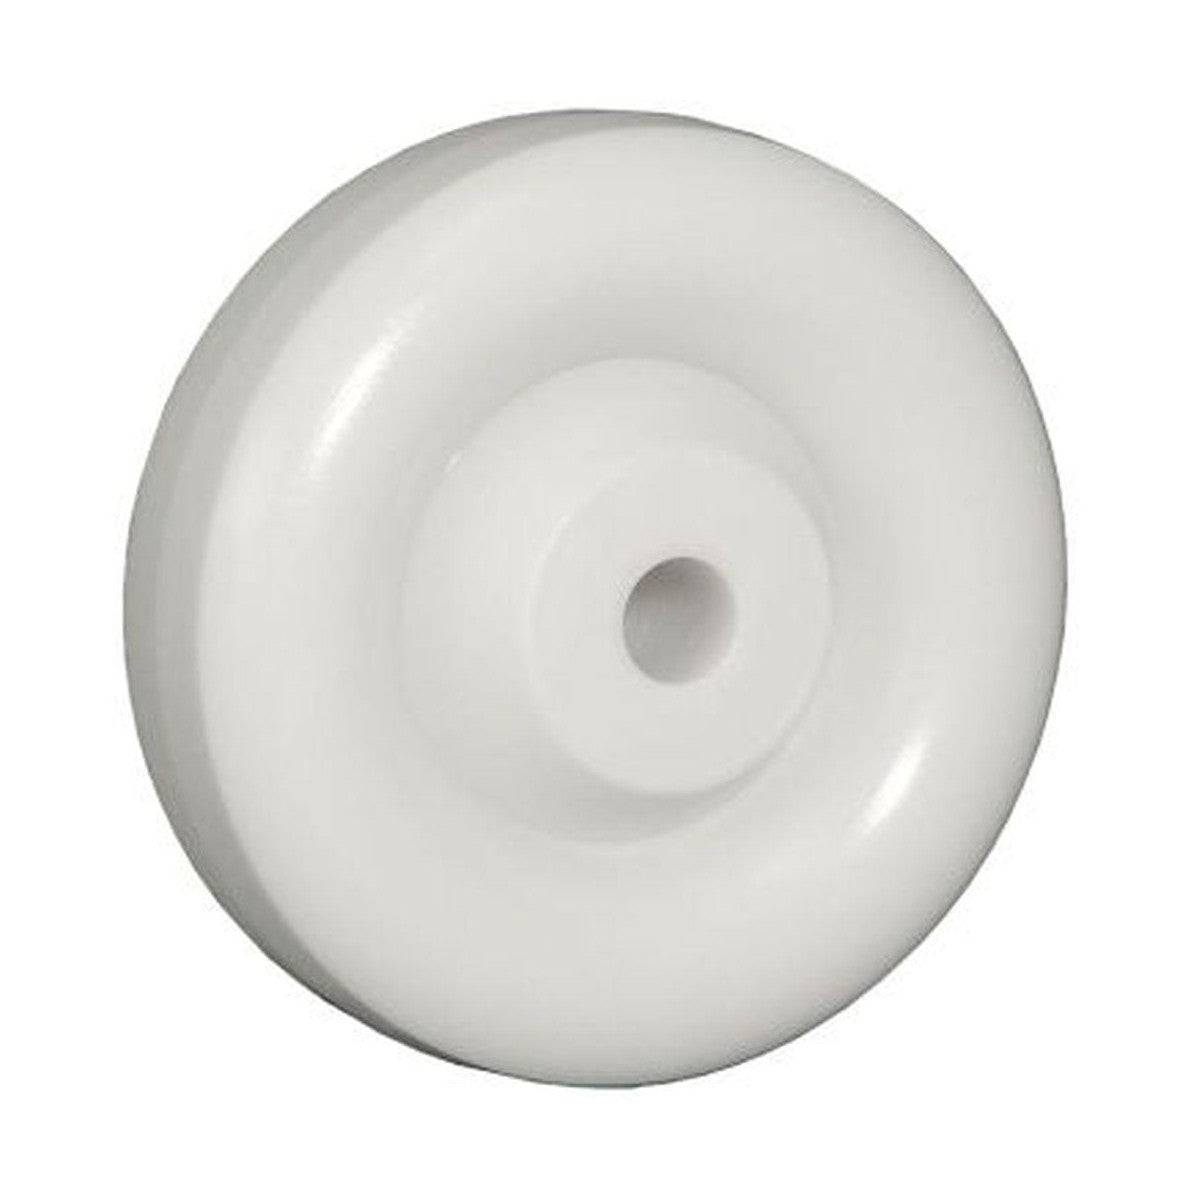 4" x 1-1/4" Polyolefin Wheel White - 350 lbs. Capacity (4-Pack) - Durable Superior Casters